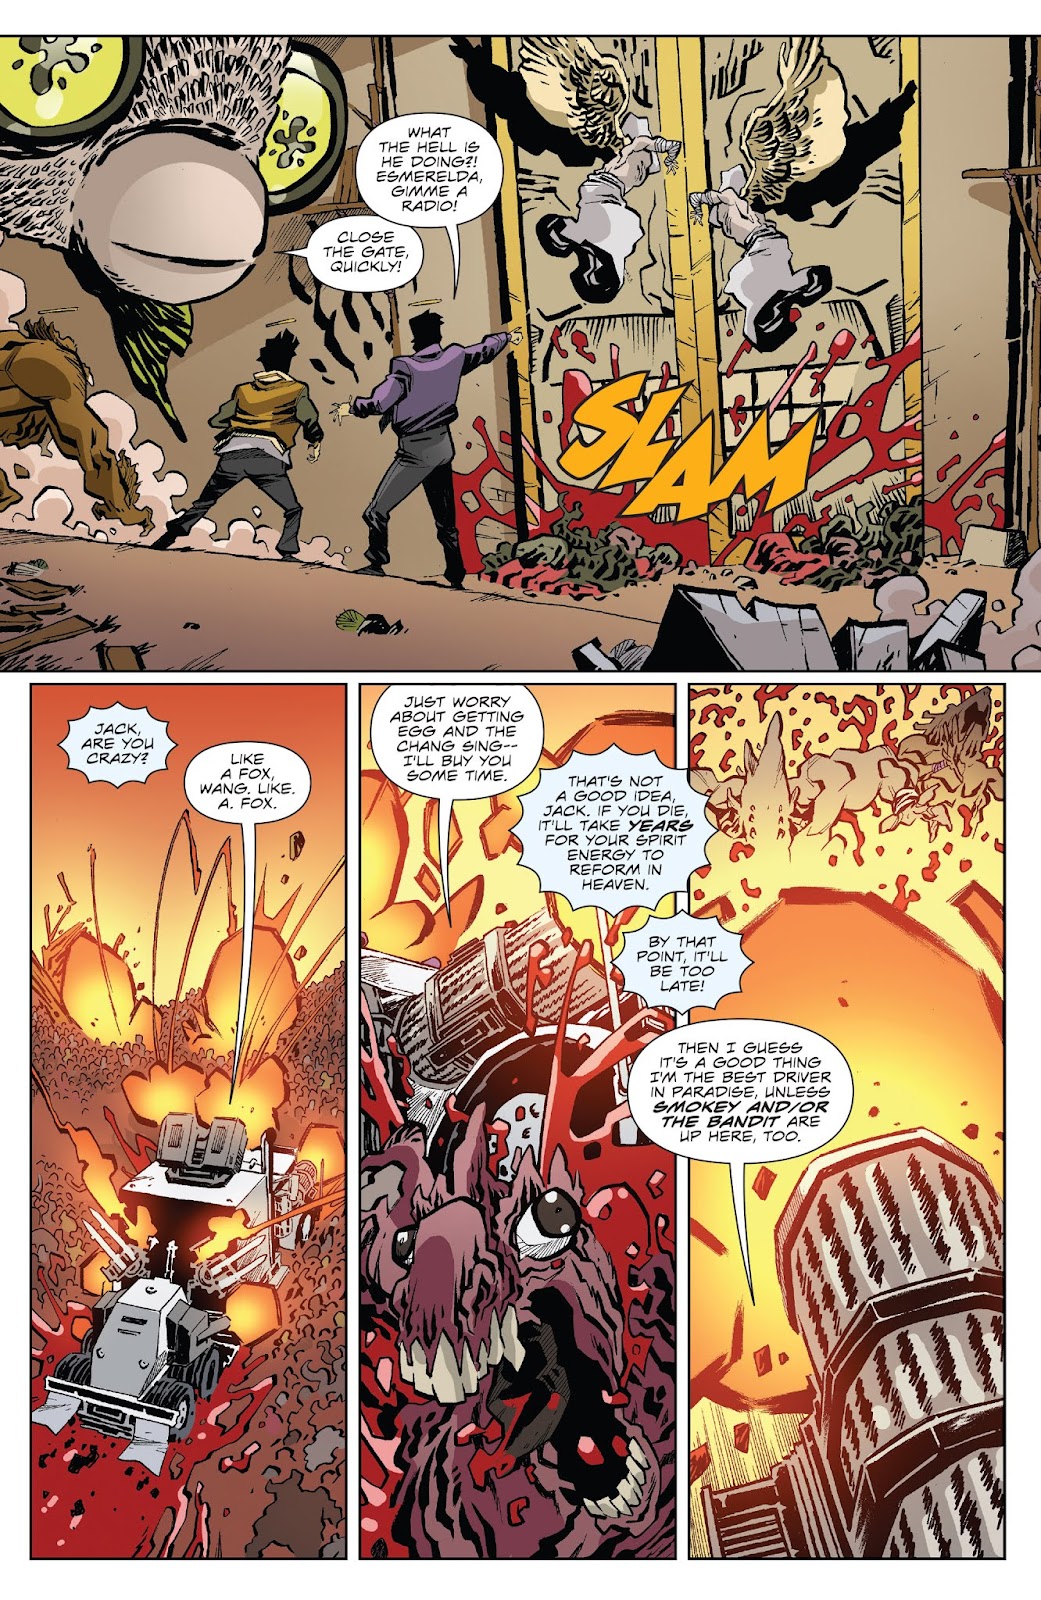 Big Trouble in Little China: Old Man Jack issue 11 - Page 15